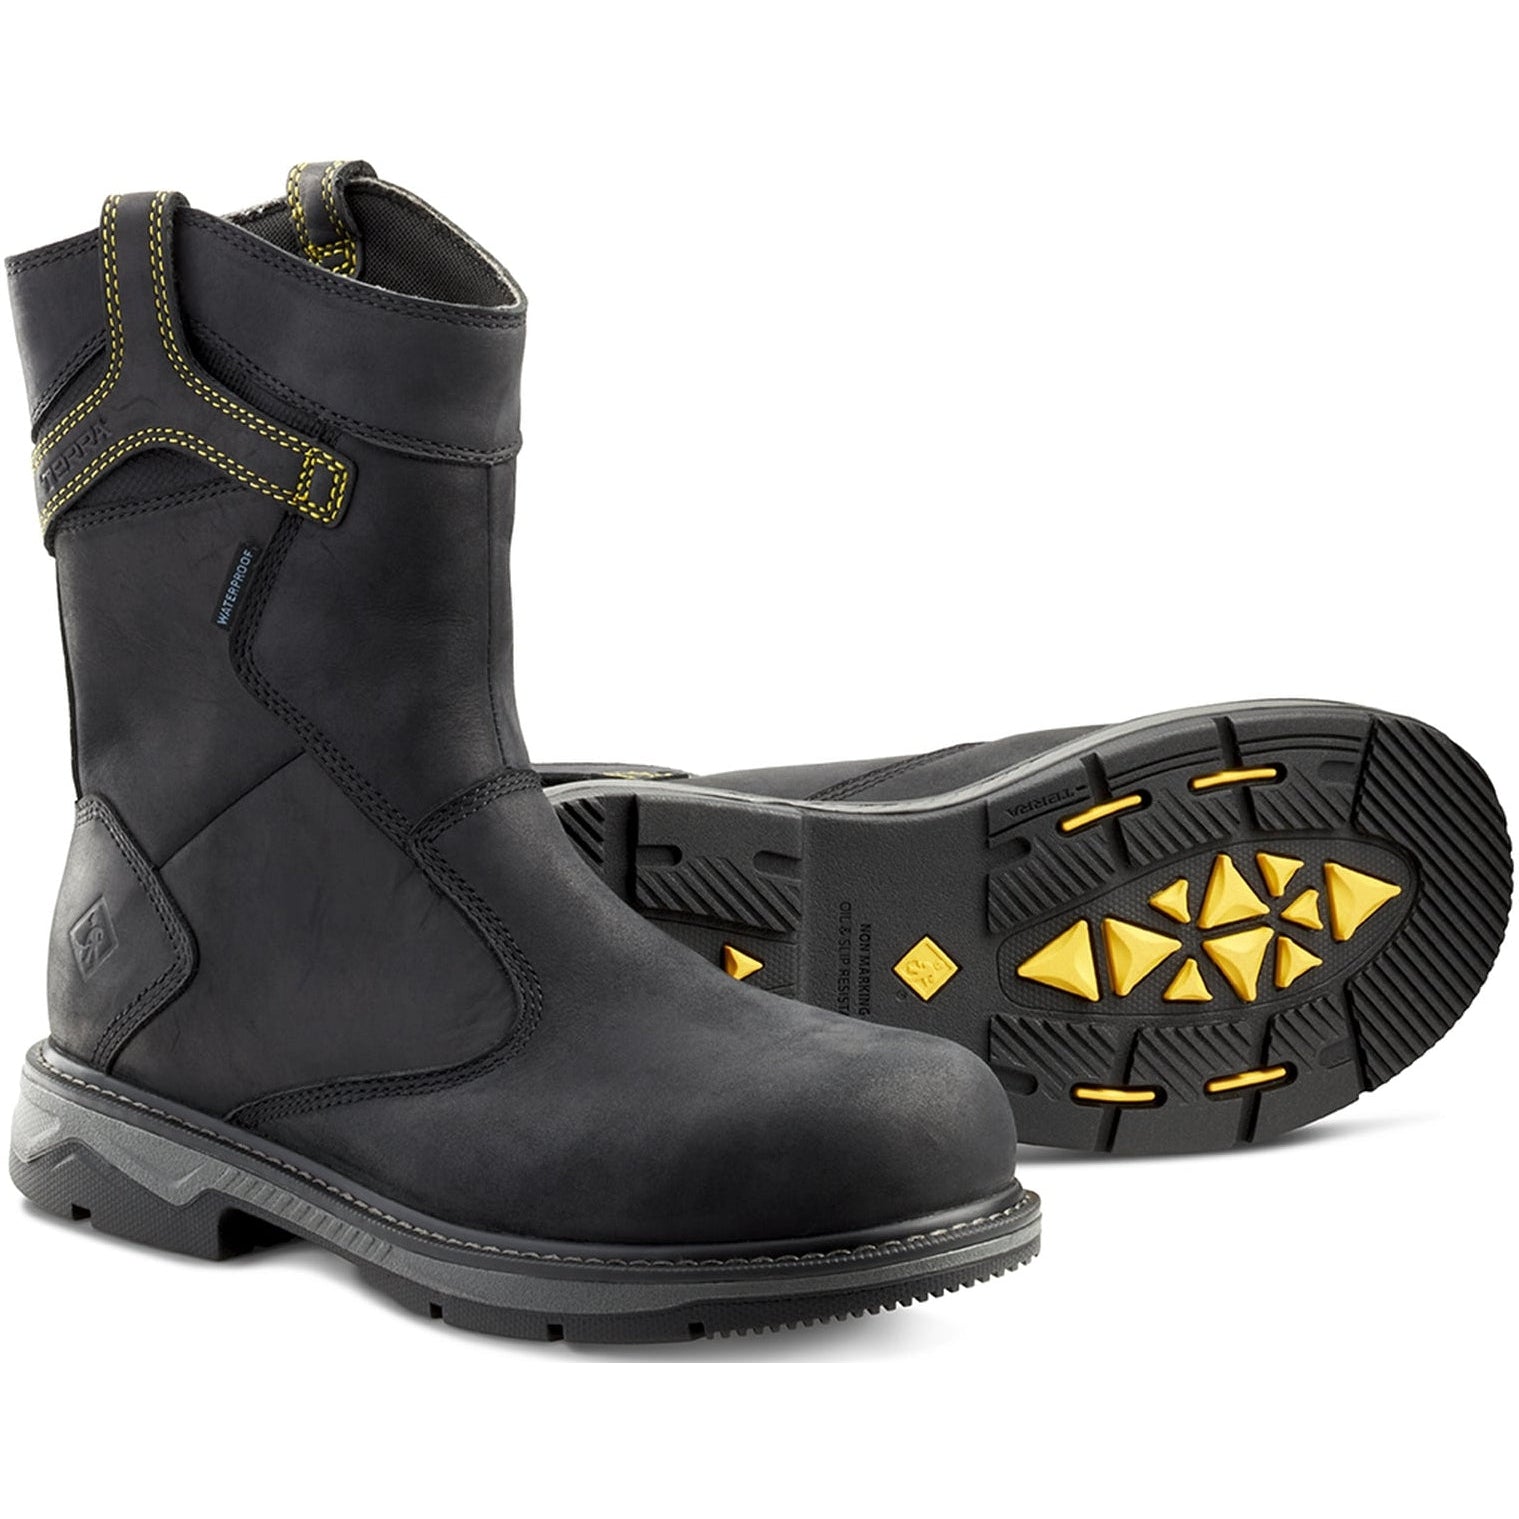 Terra Men's Patton AT Waterproof Pull-On Safety Work Boot -Black- 4TCBBK  - Overlook Boots